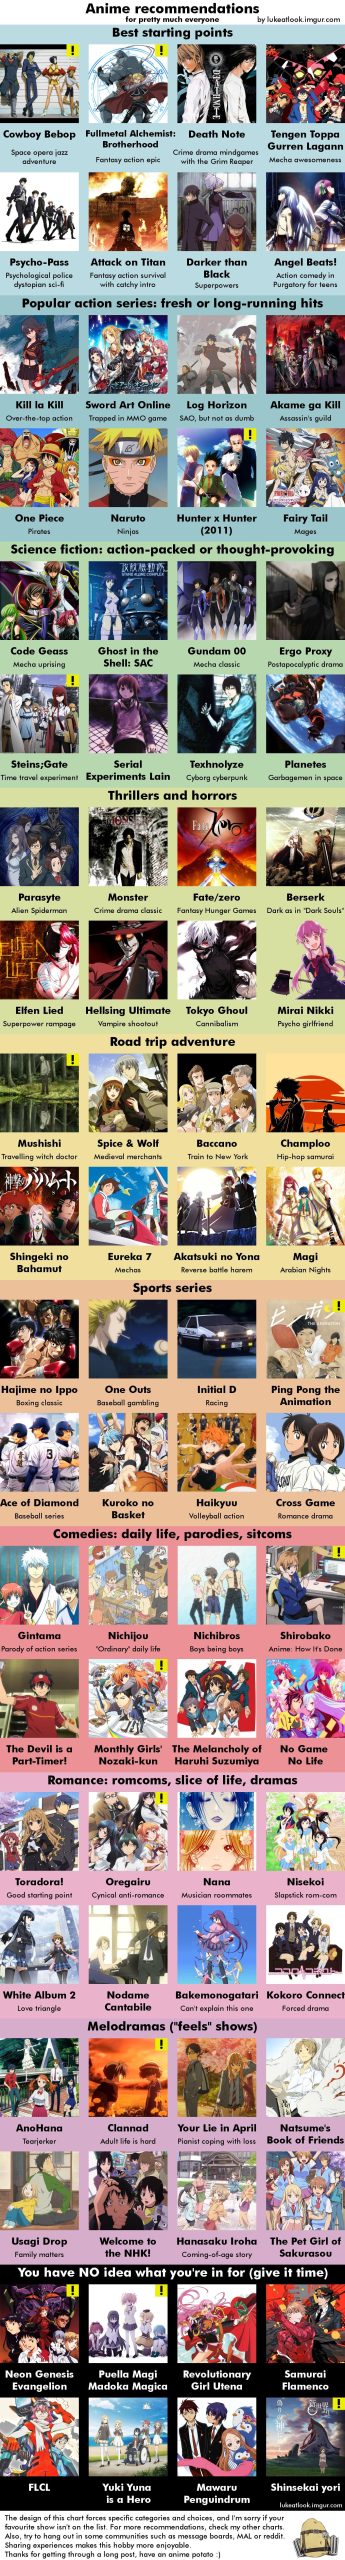 Anime recommendations for everyone in 9 categories